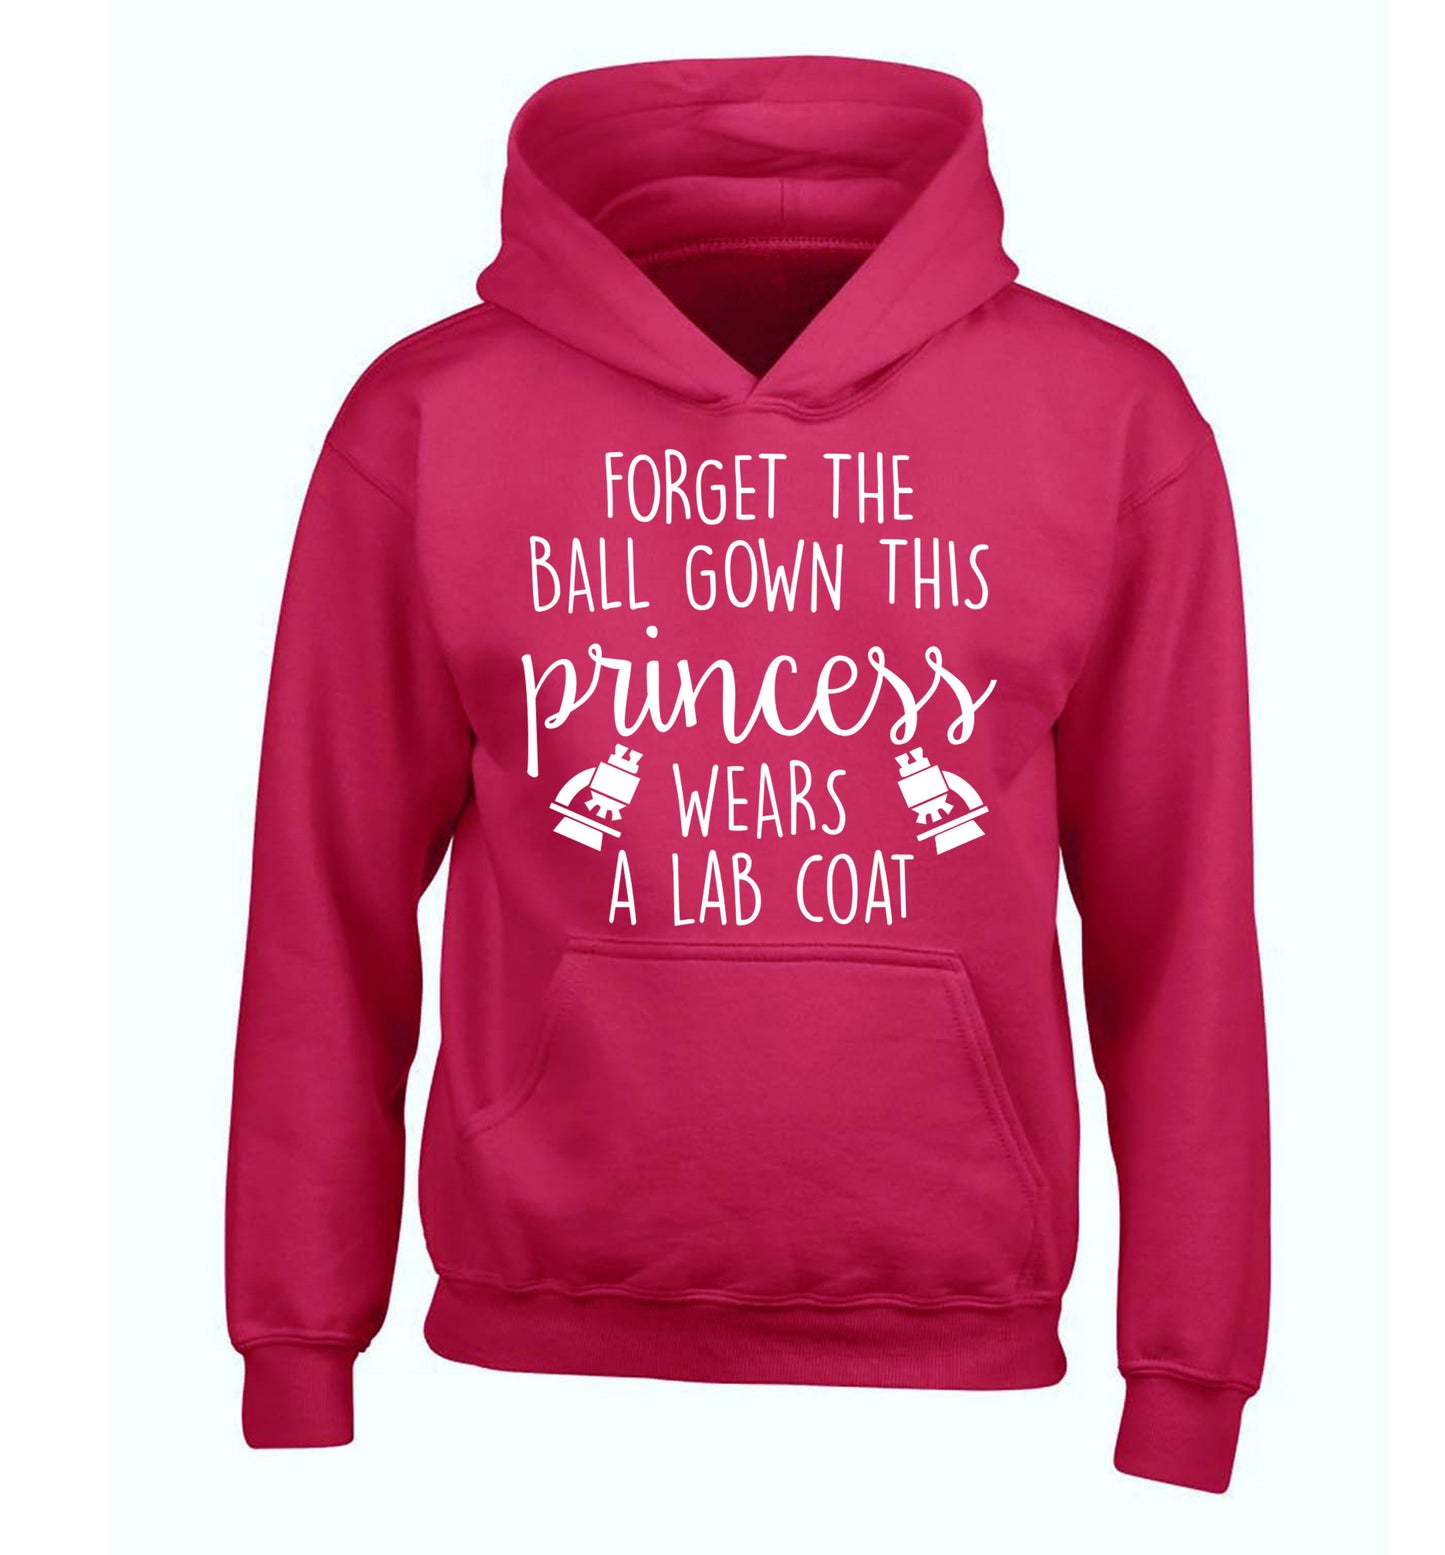 Forget the ball gown this princess wears a lab coat children's pink hoodie 12-14 Years